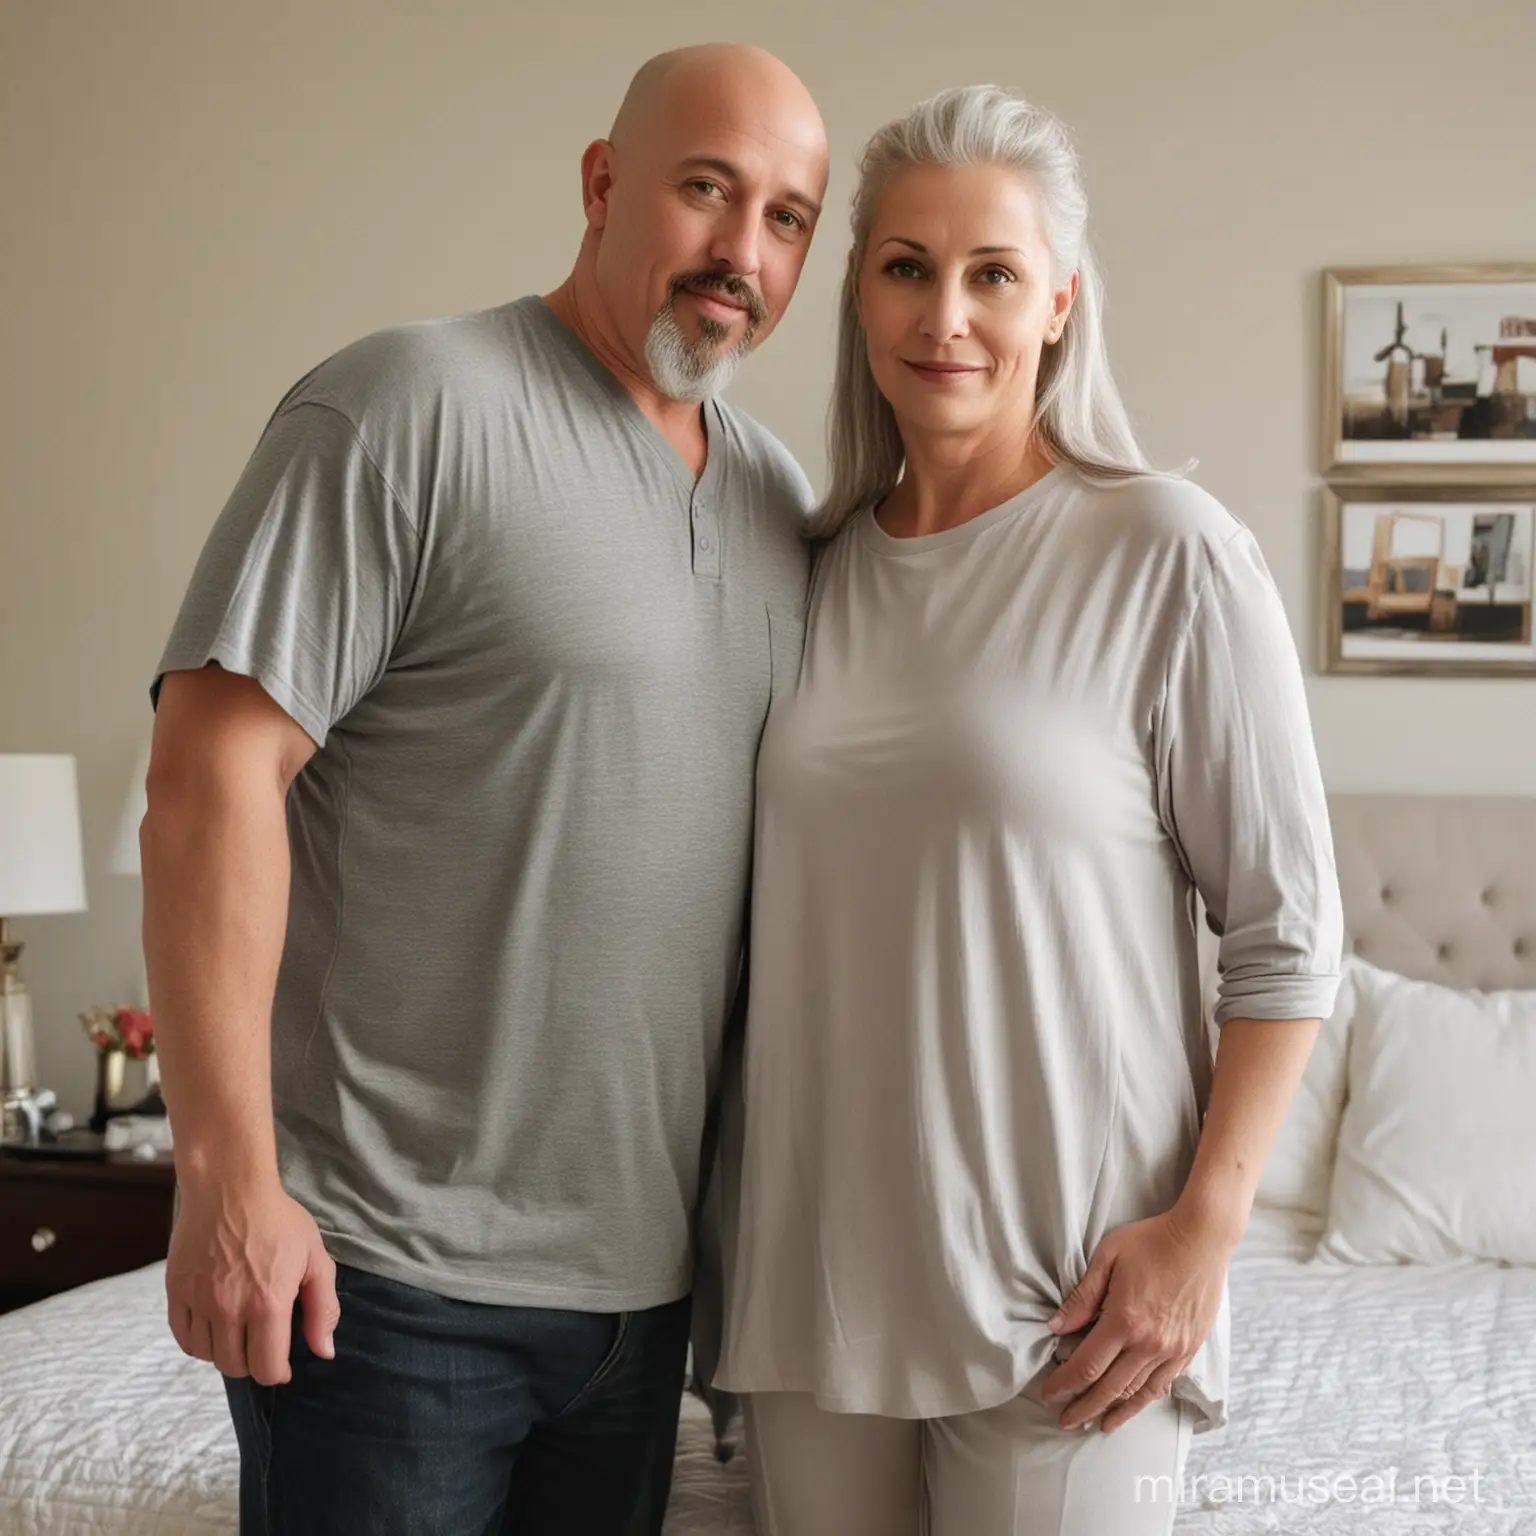 fat, 5 foot, 50 year old, bald, man, light goatee, standing in bedroom, holding  lady, 55 year old, silver hair, tall, fit, wife